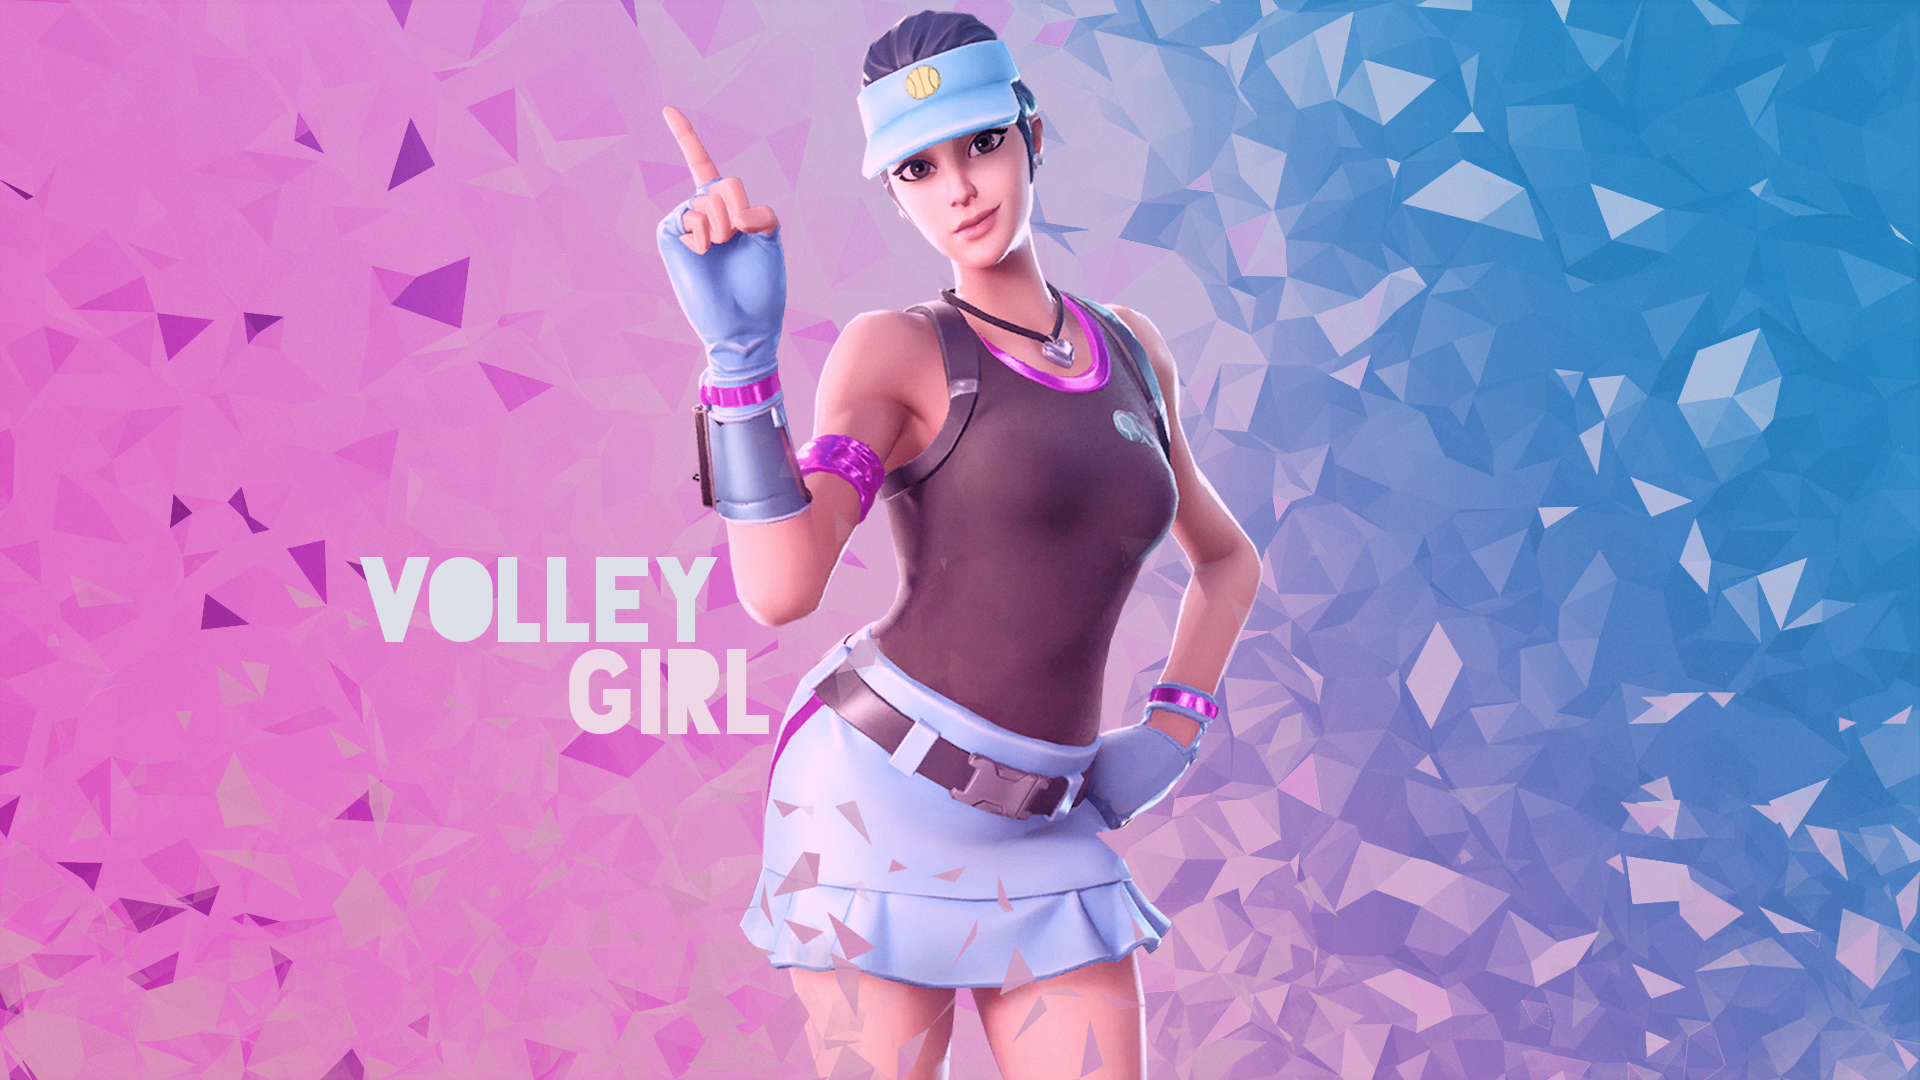 I missed getting this skin but I figured I'd make a Volley Girl